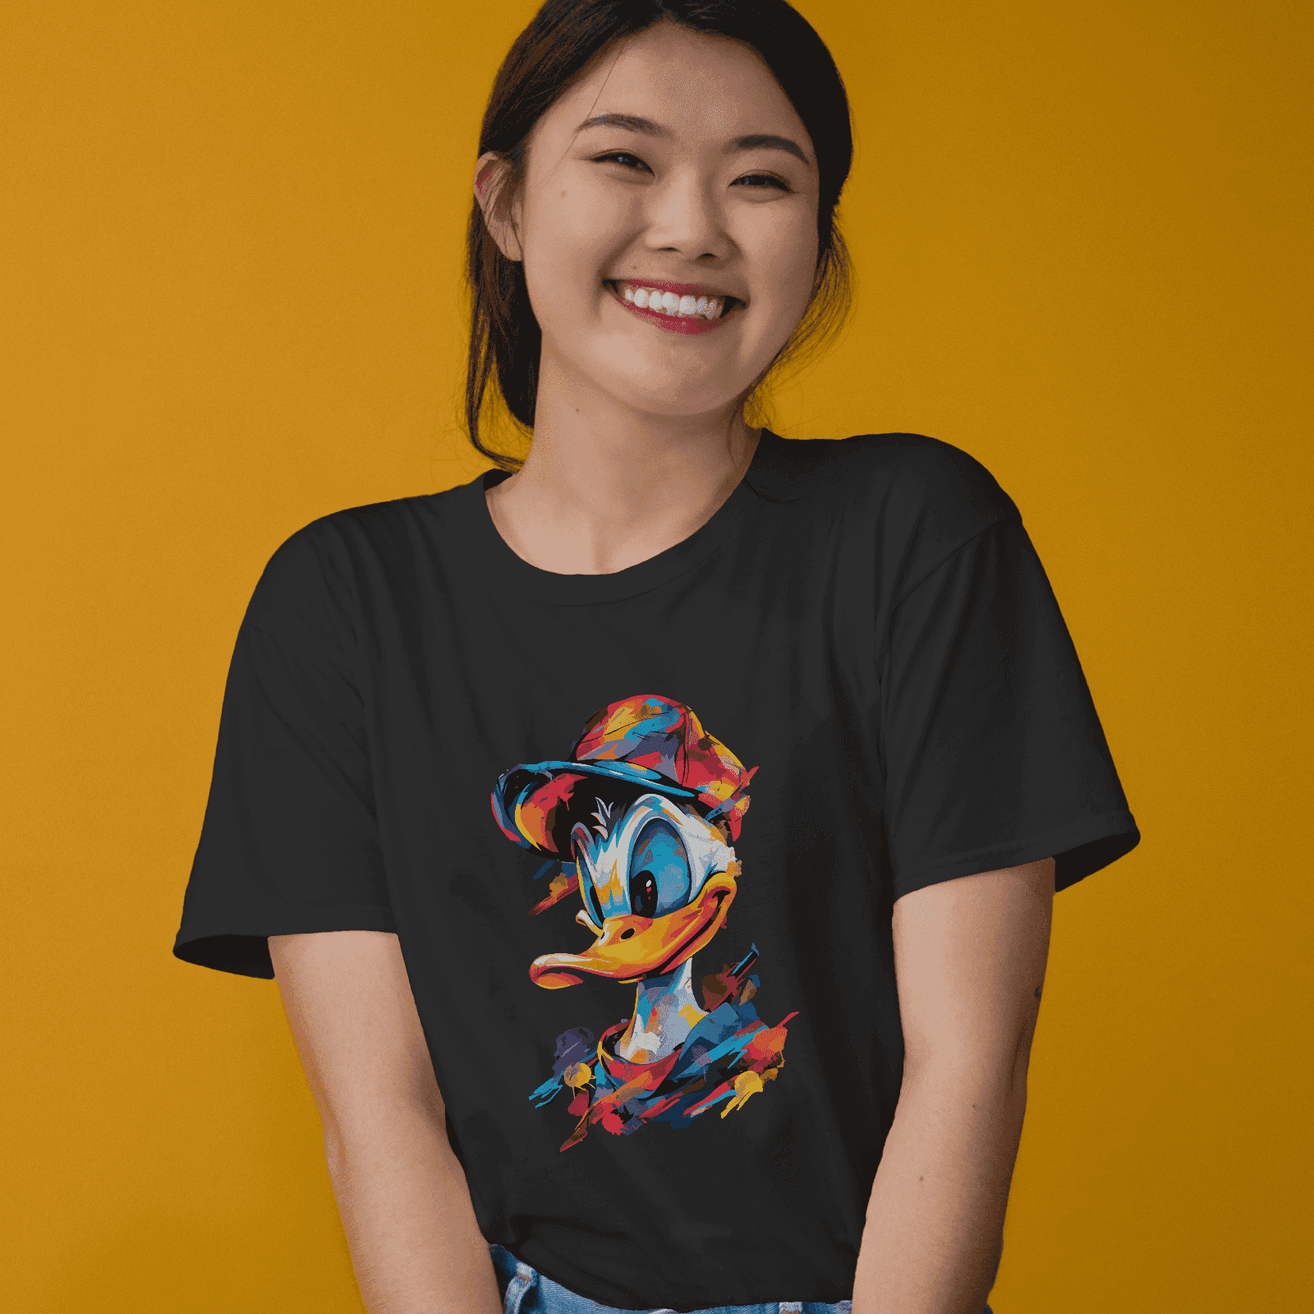 Playful Hue Women's Colorful Donald Duck T-Shirt - Whimsical Wardrobe Delight